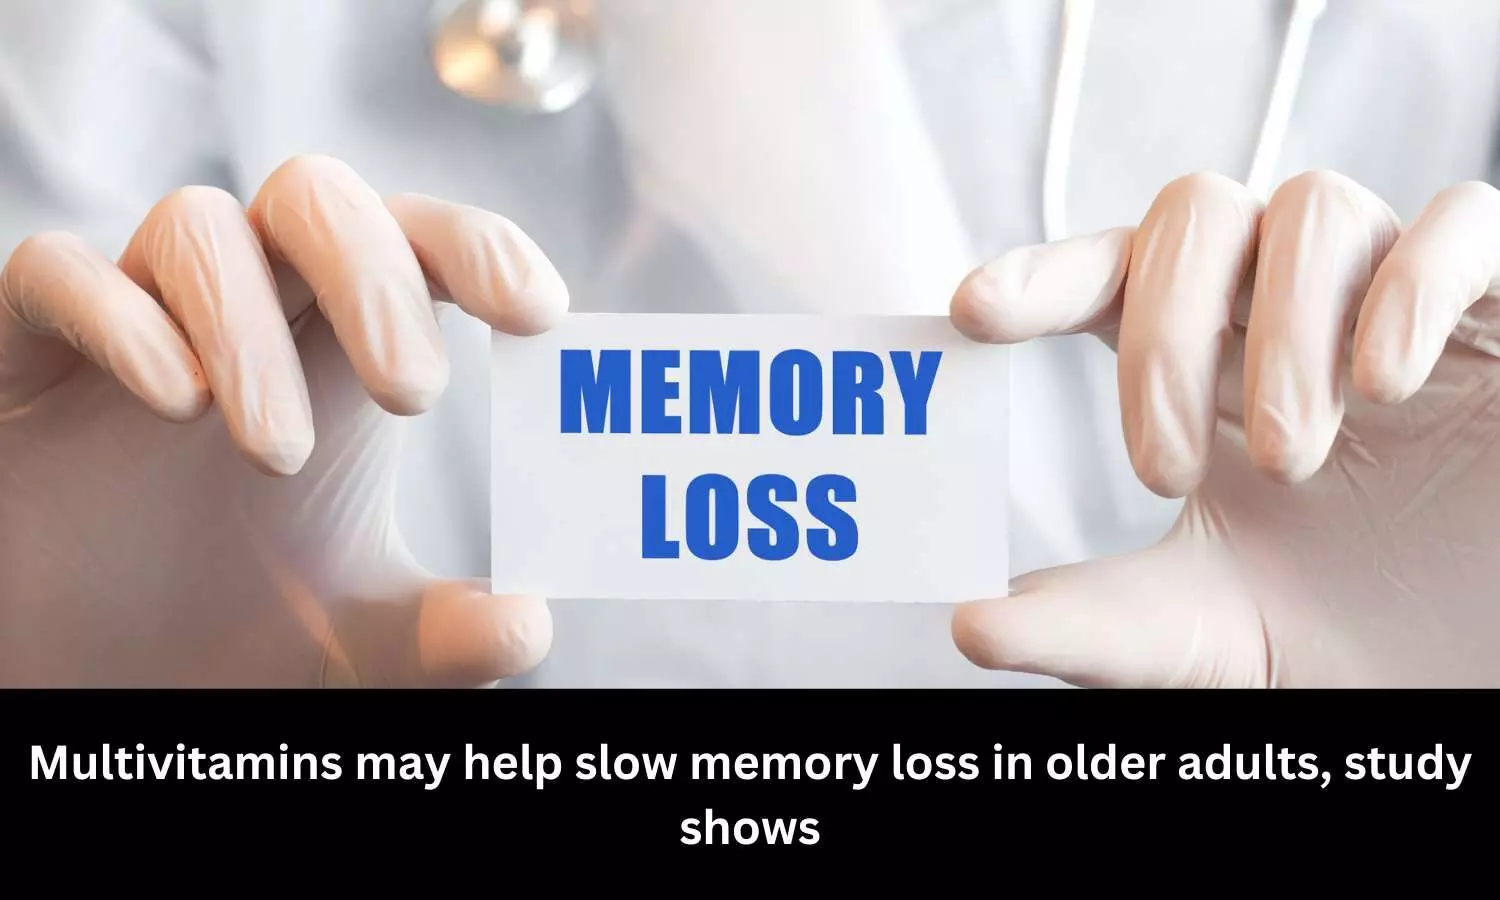 Multivitamins may help slow memory loss in older adults: Study